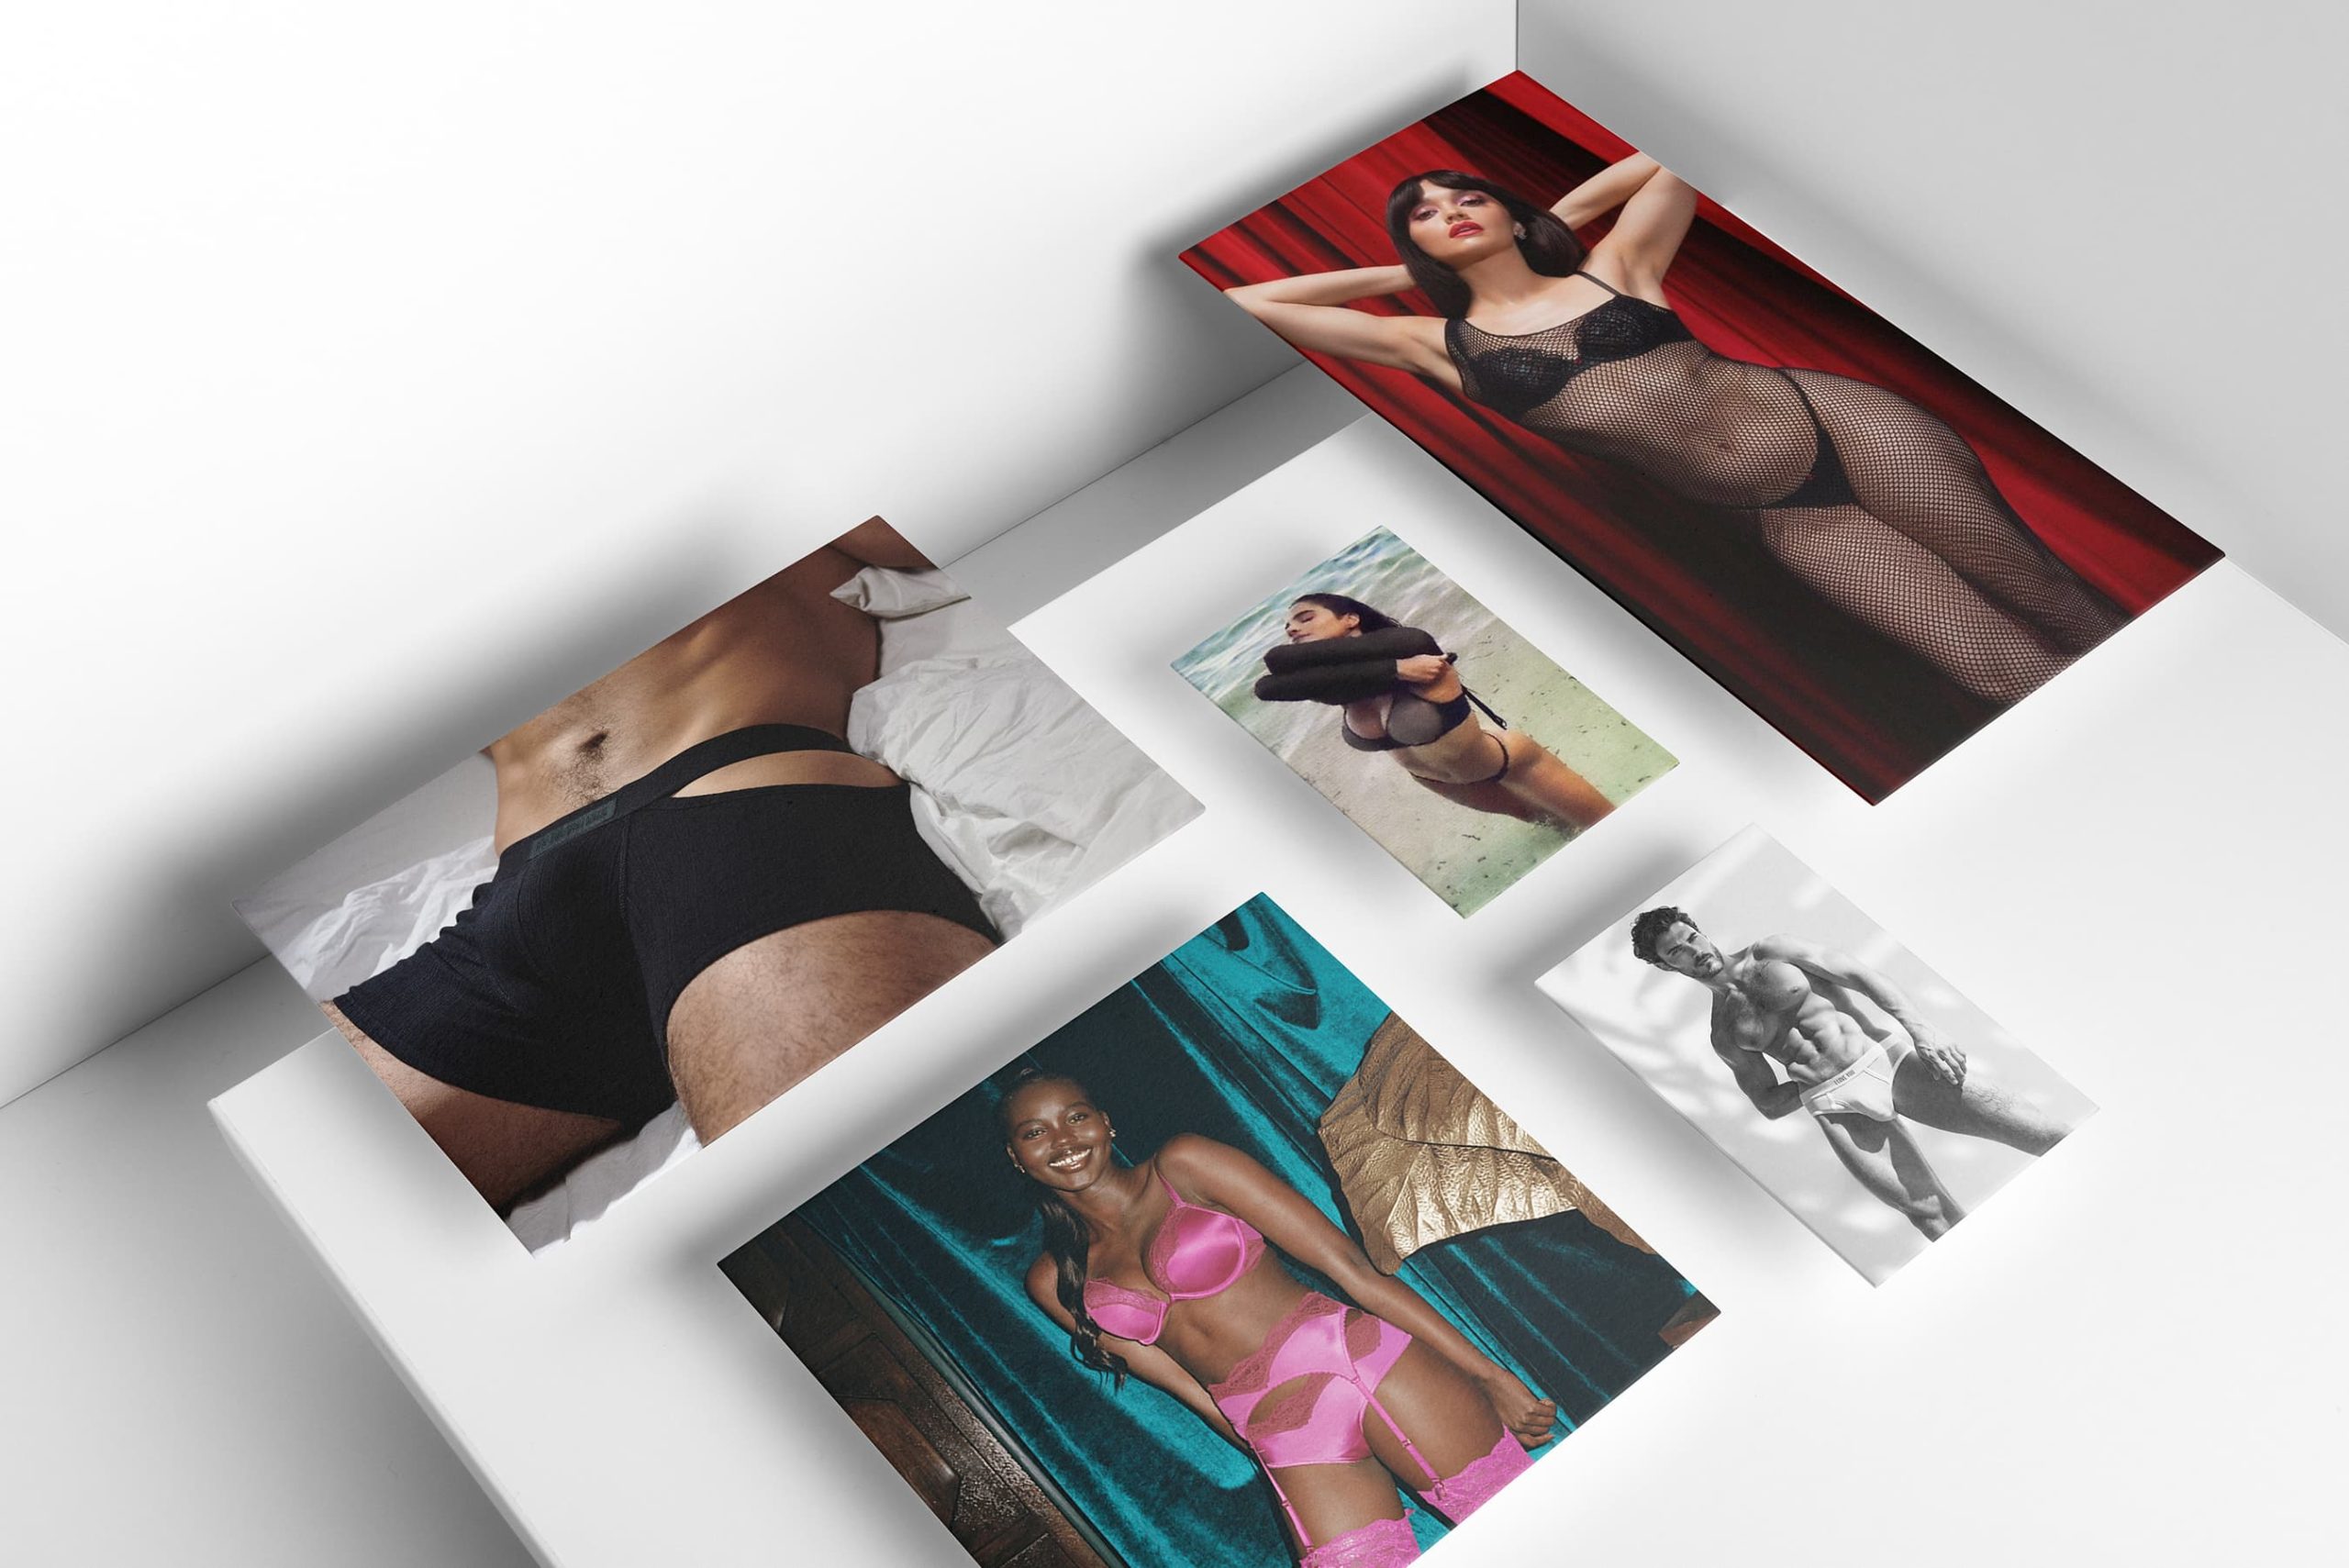 Best intimates ad campaign header image